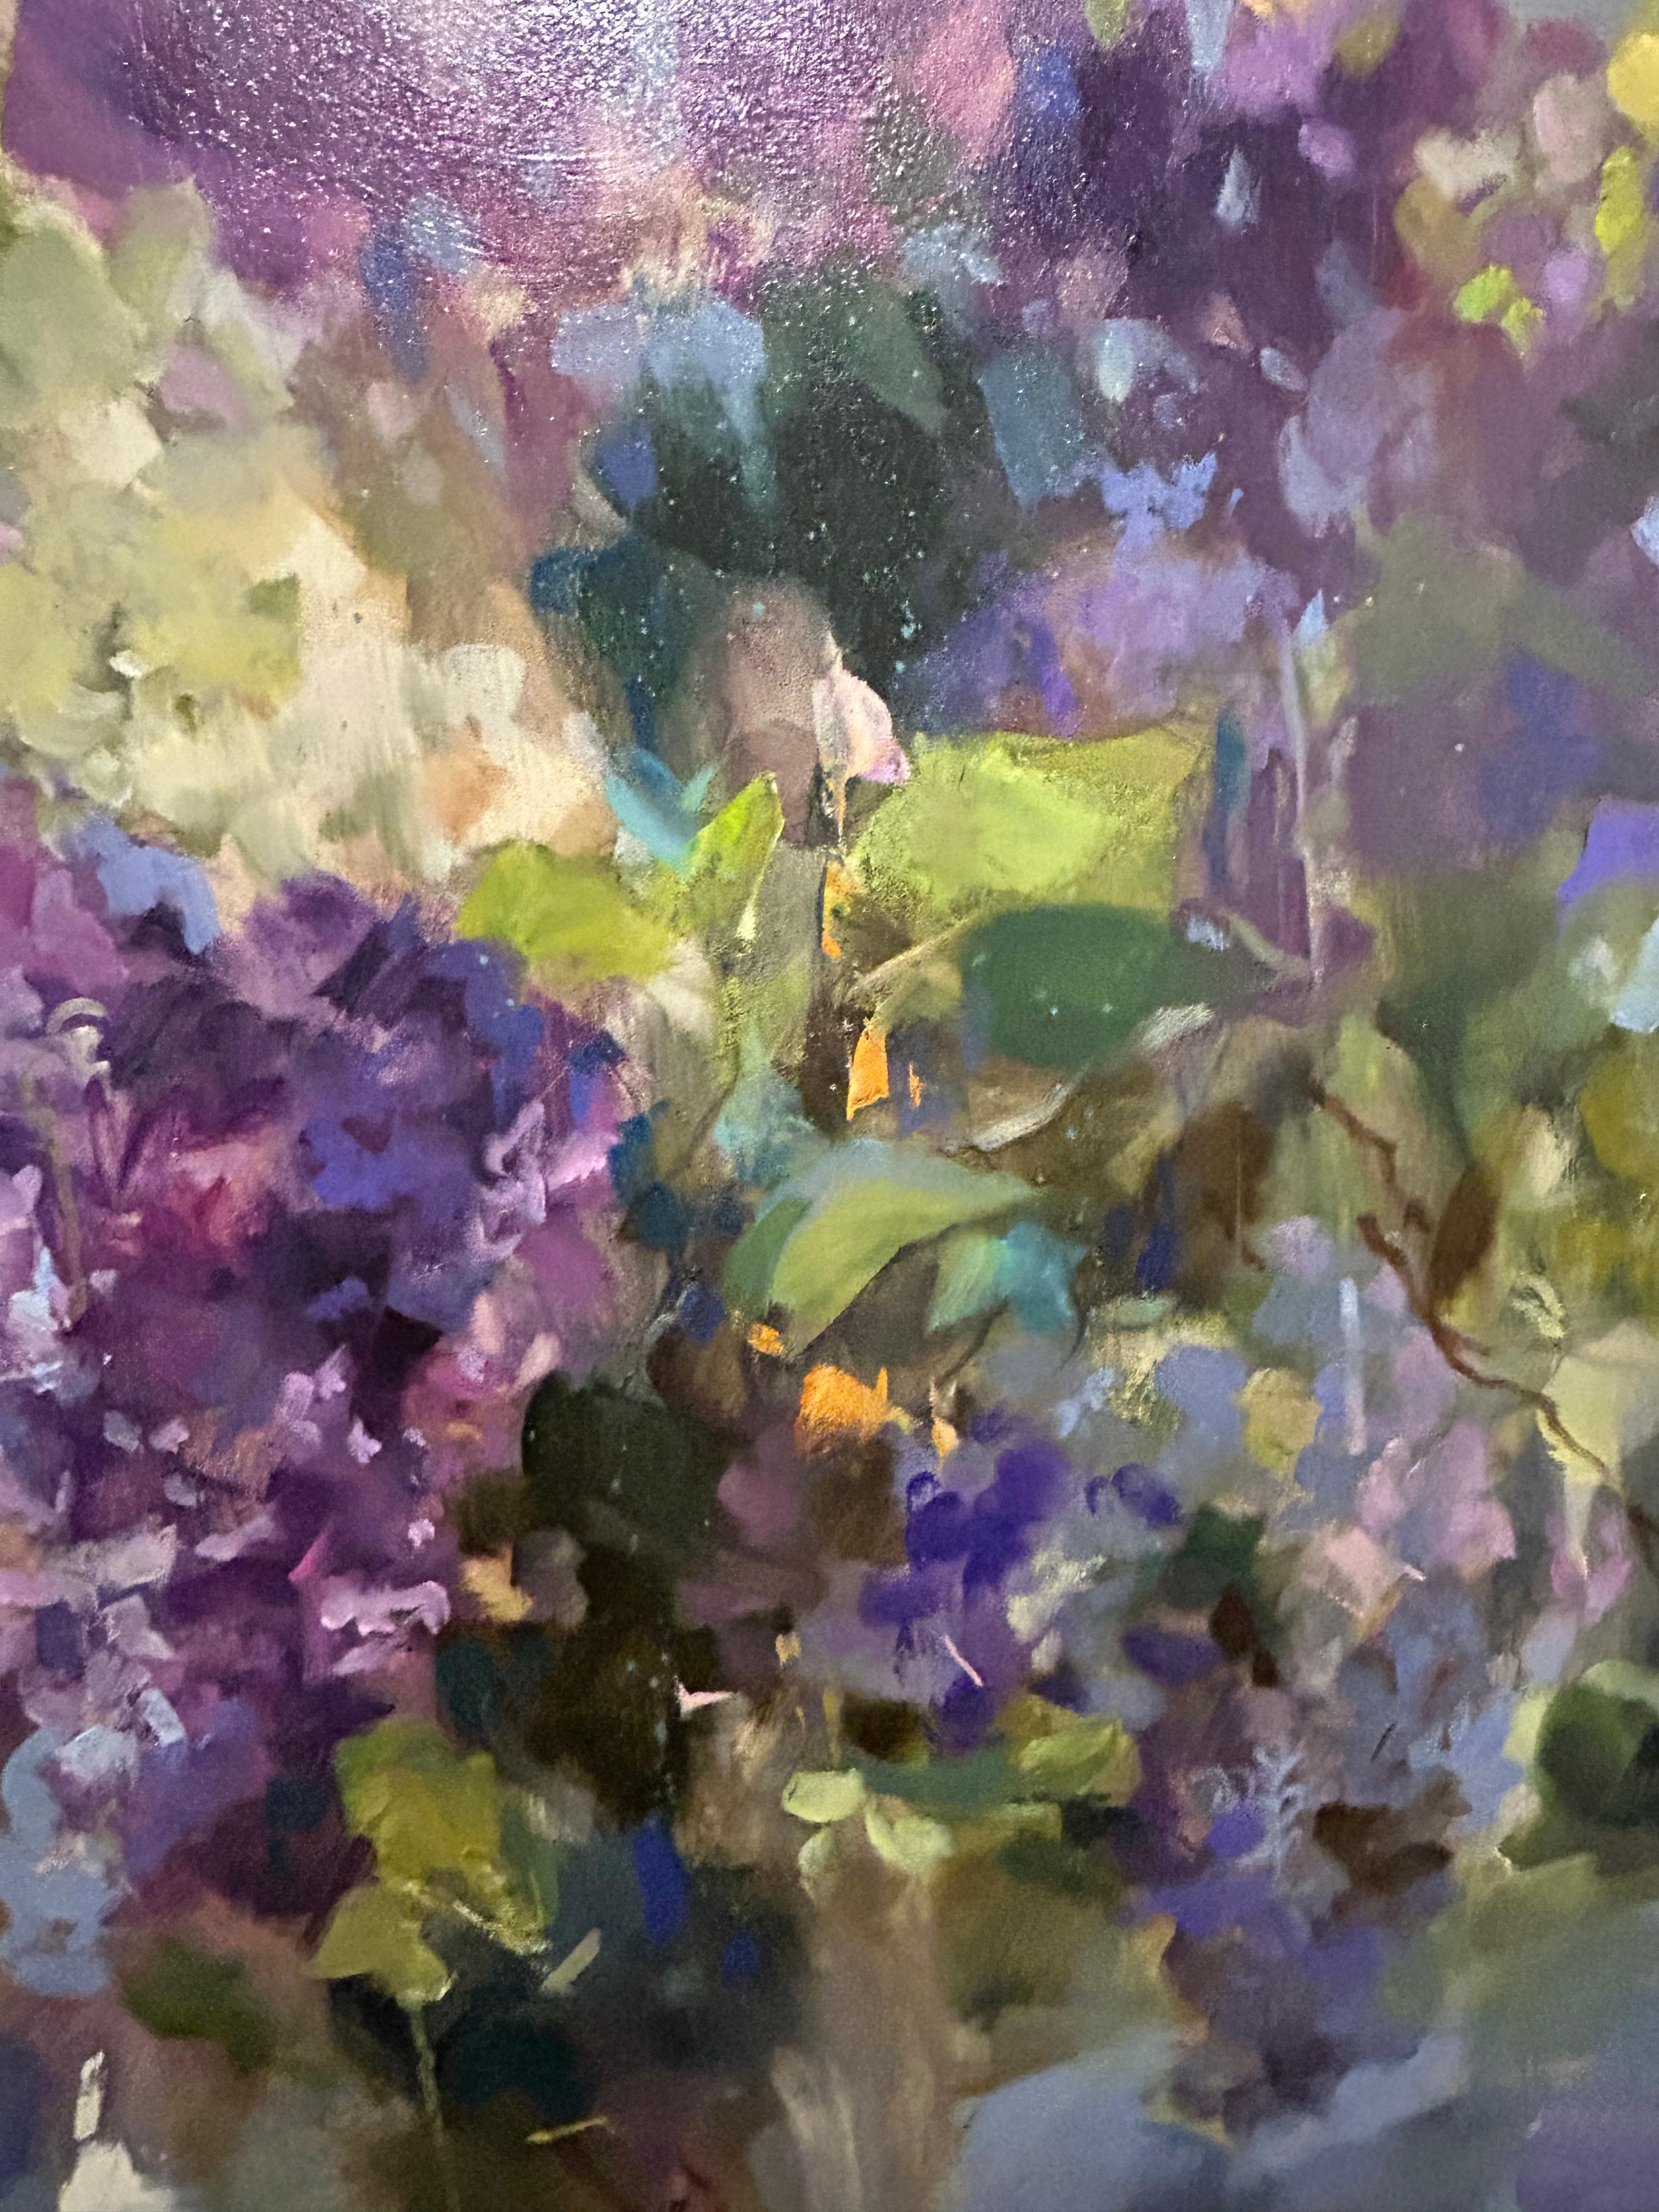 Original Oil on Canvas work by Russian-Canadian artist Anna Razumovskaya featuring impressionist style purple flowers and a vase. Razumovskaya's signature soft brushwork is on display in this piece, creating a vase of hydrangeas out of simple